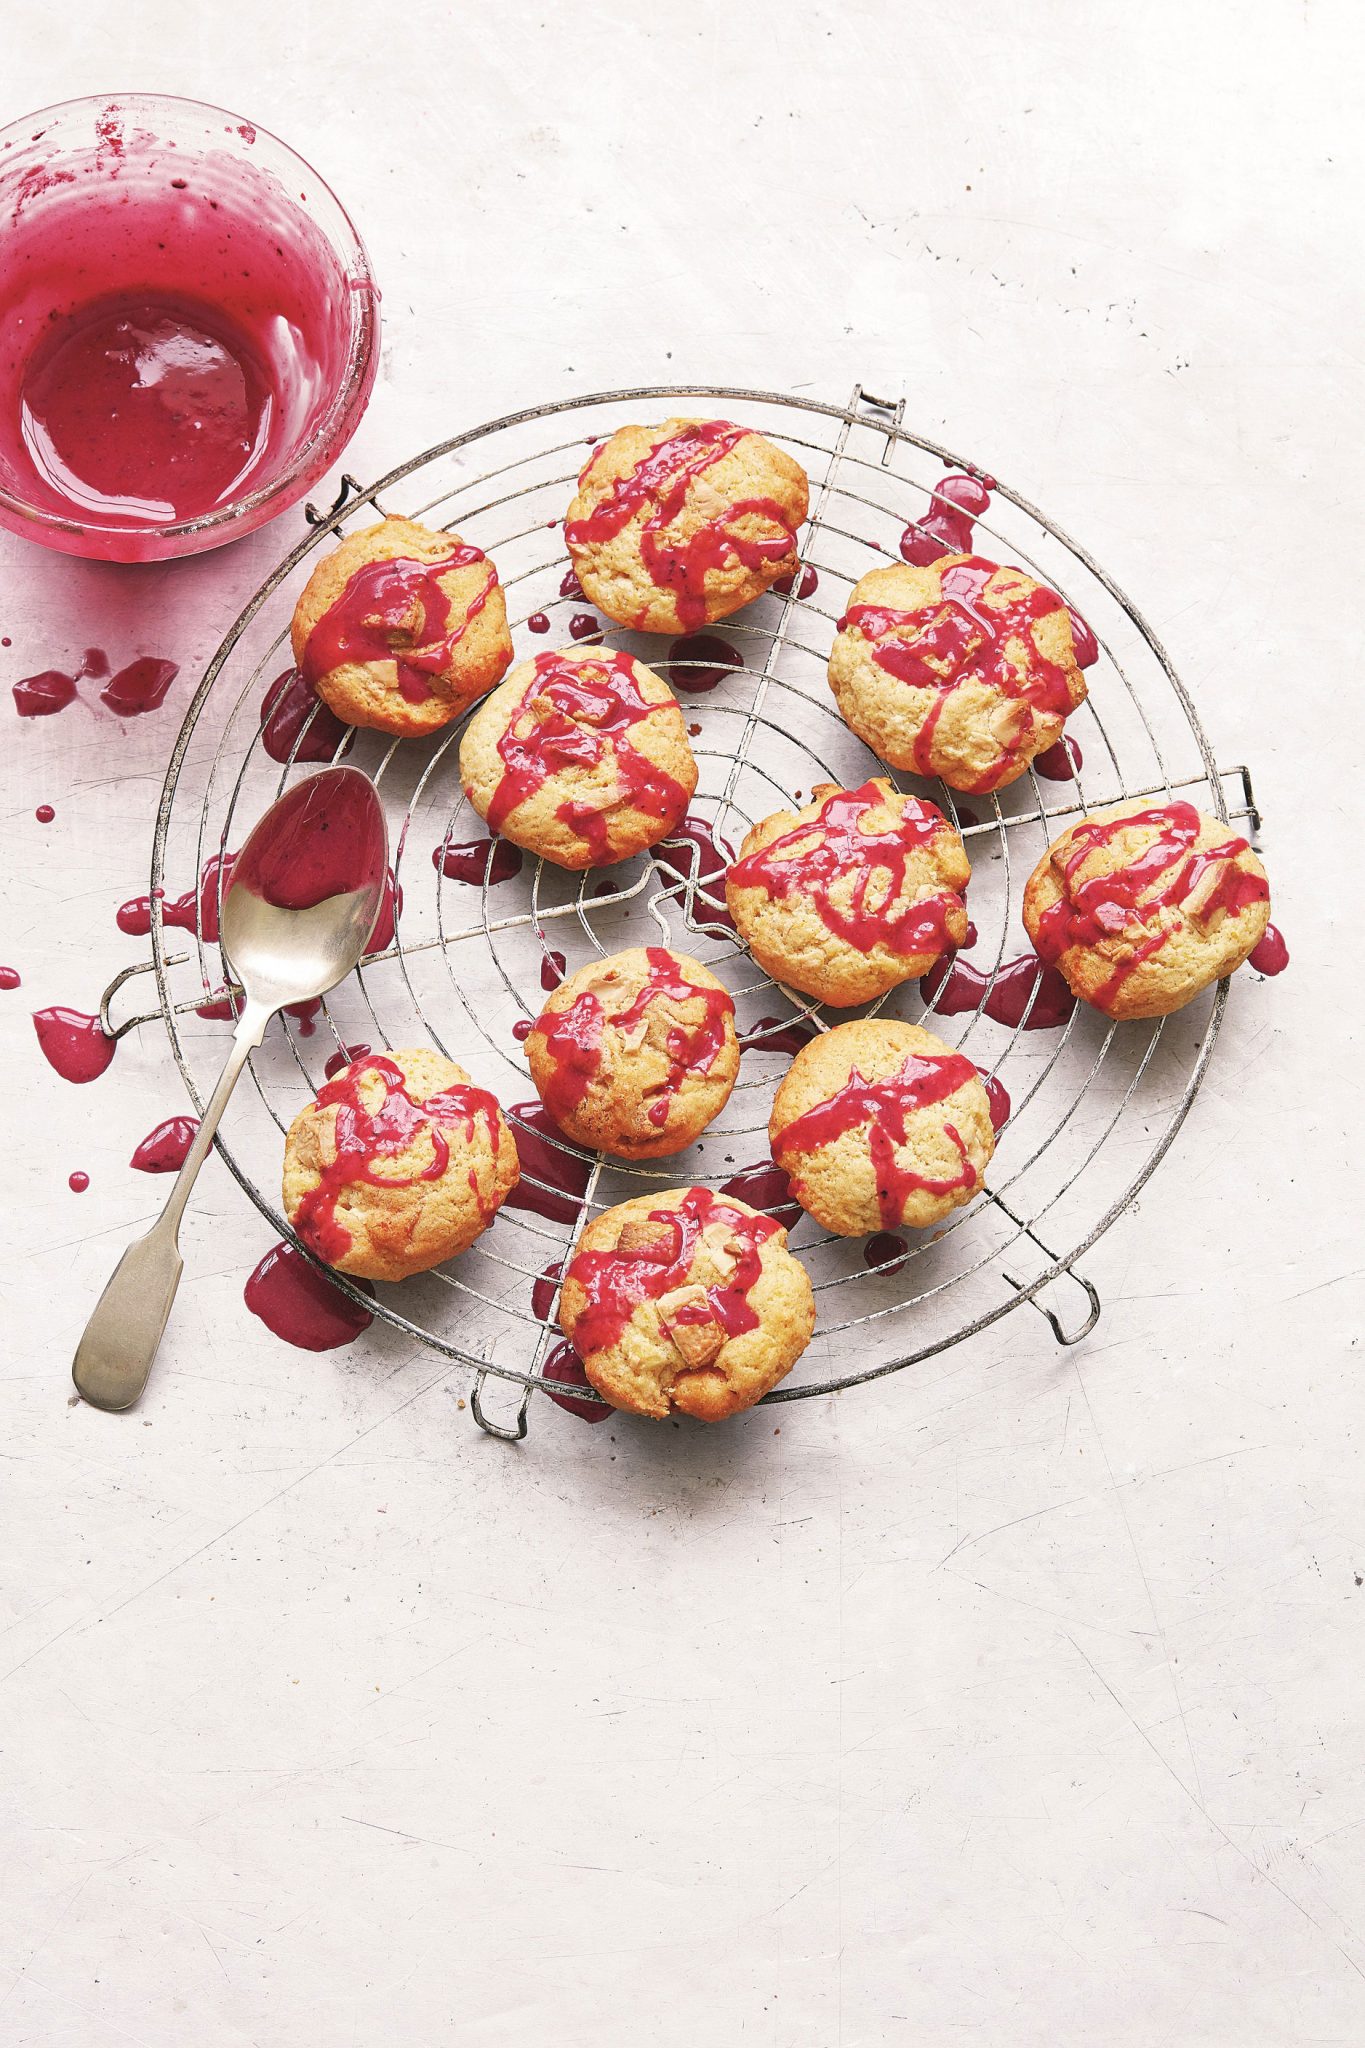 Sweetcorn and white chocolate cookies with blackberry glaze